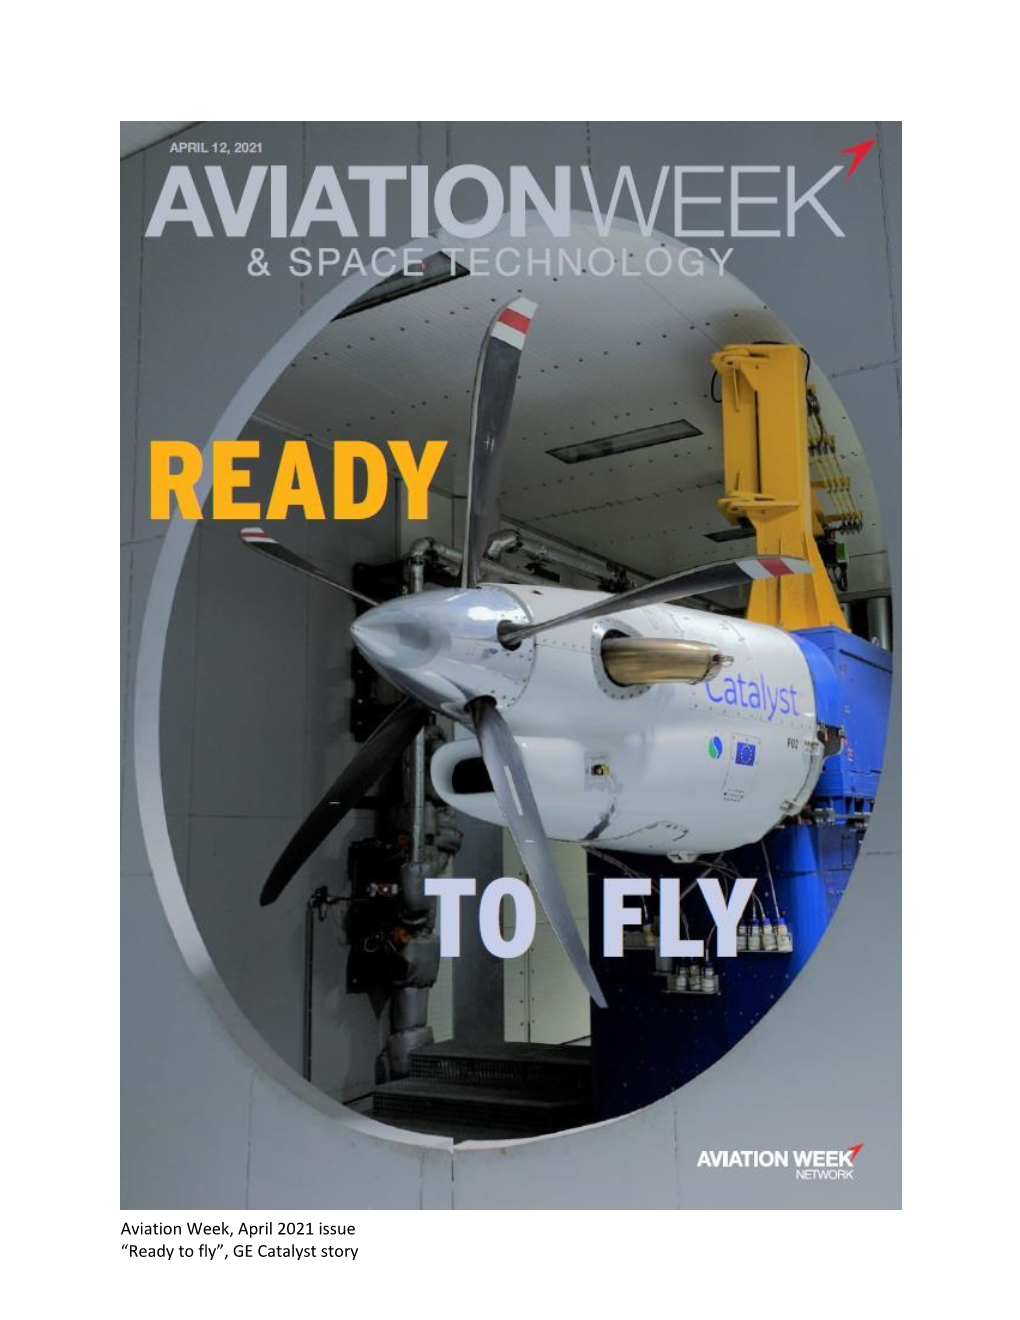 Aviation Week, April 2021 Issue “Ready to Fly”, GE Catalyst Story